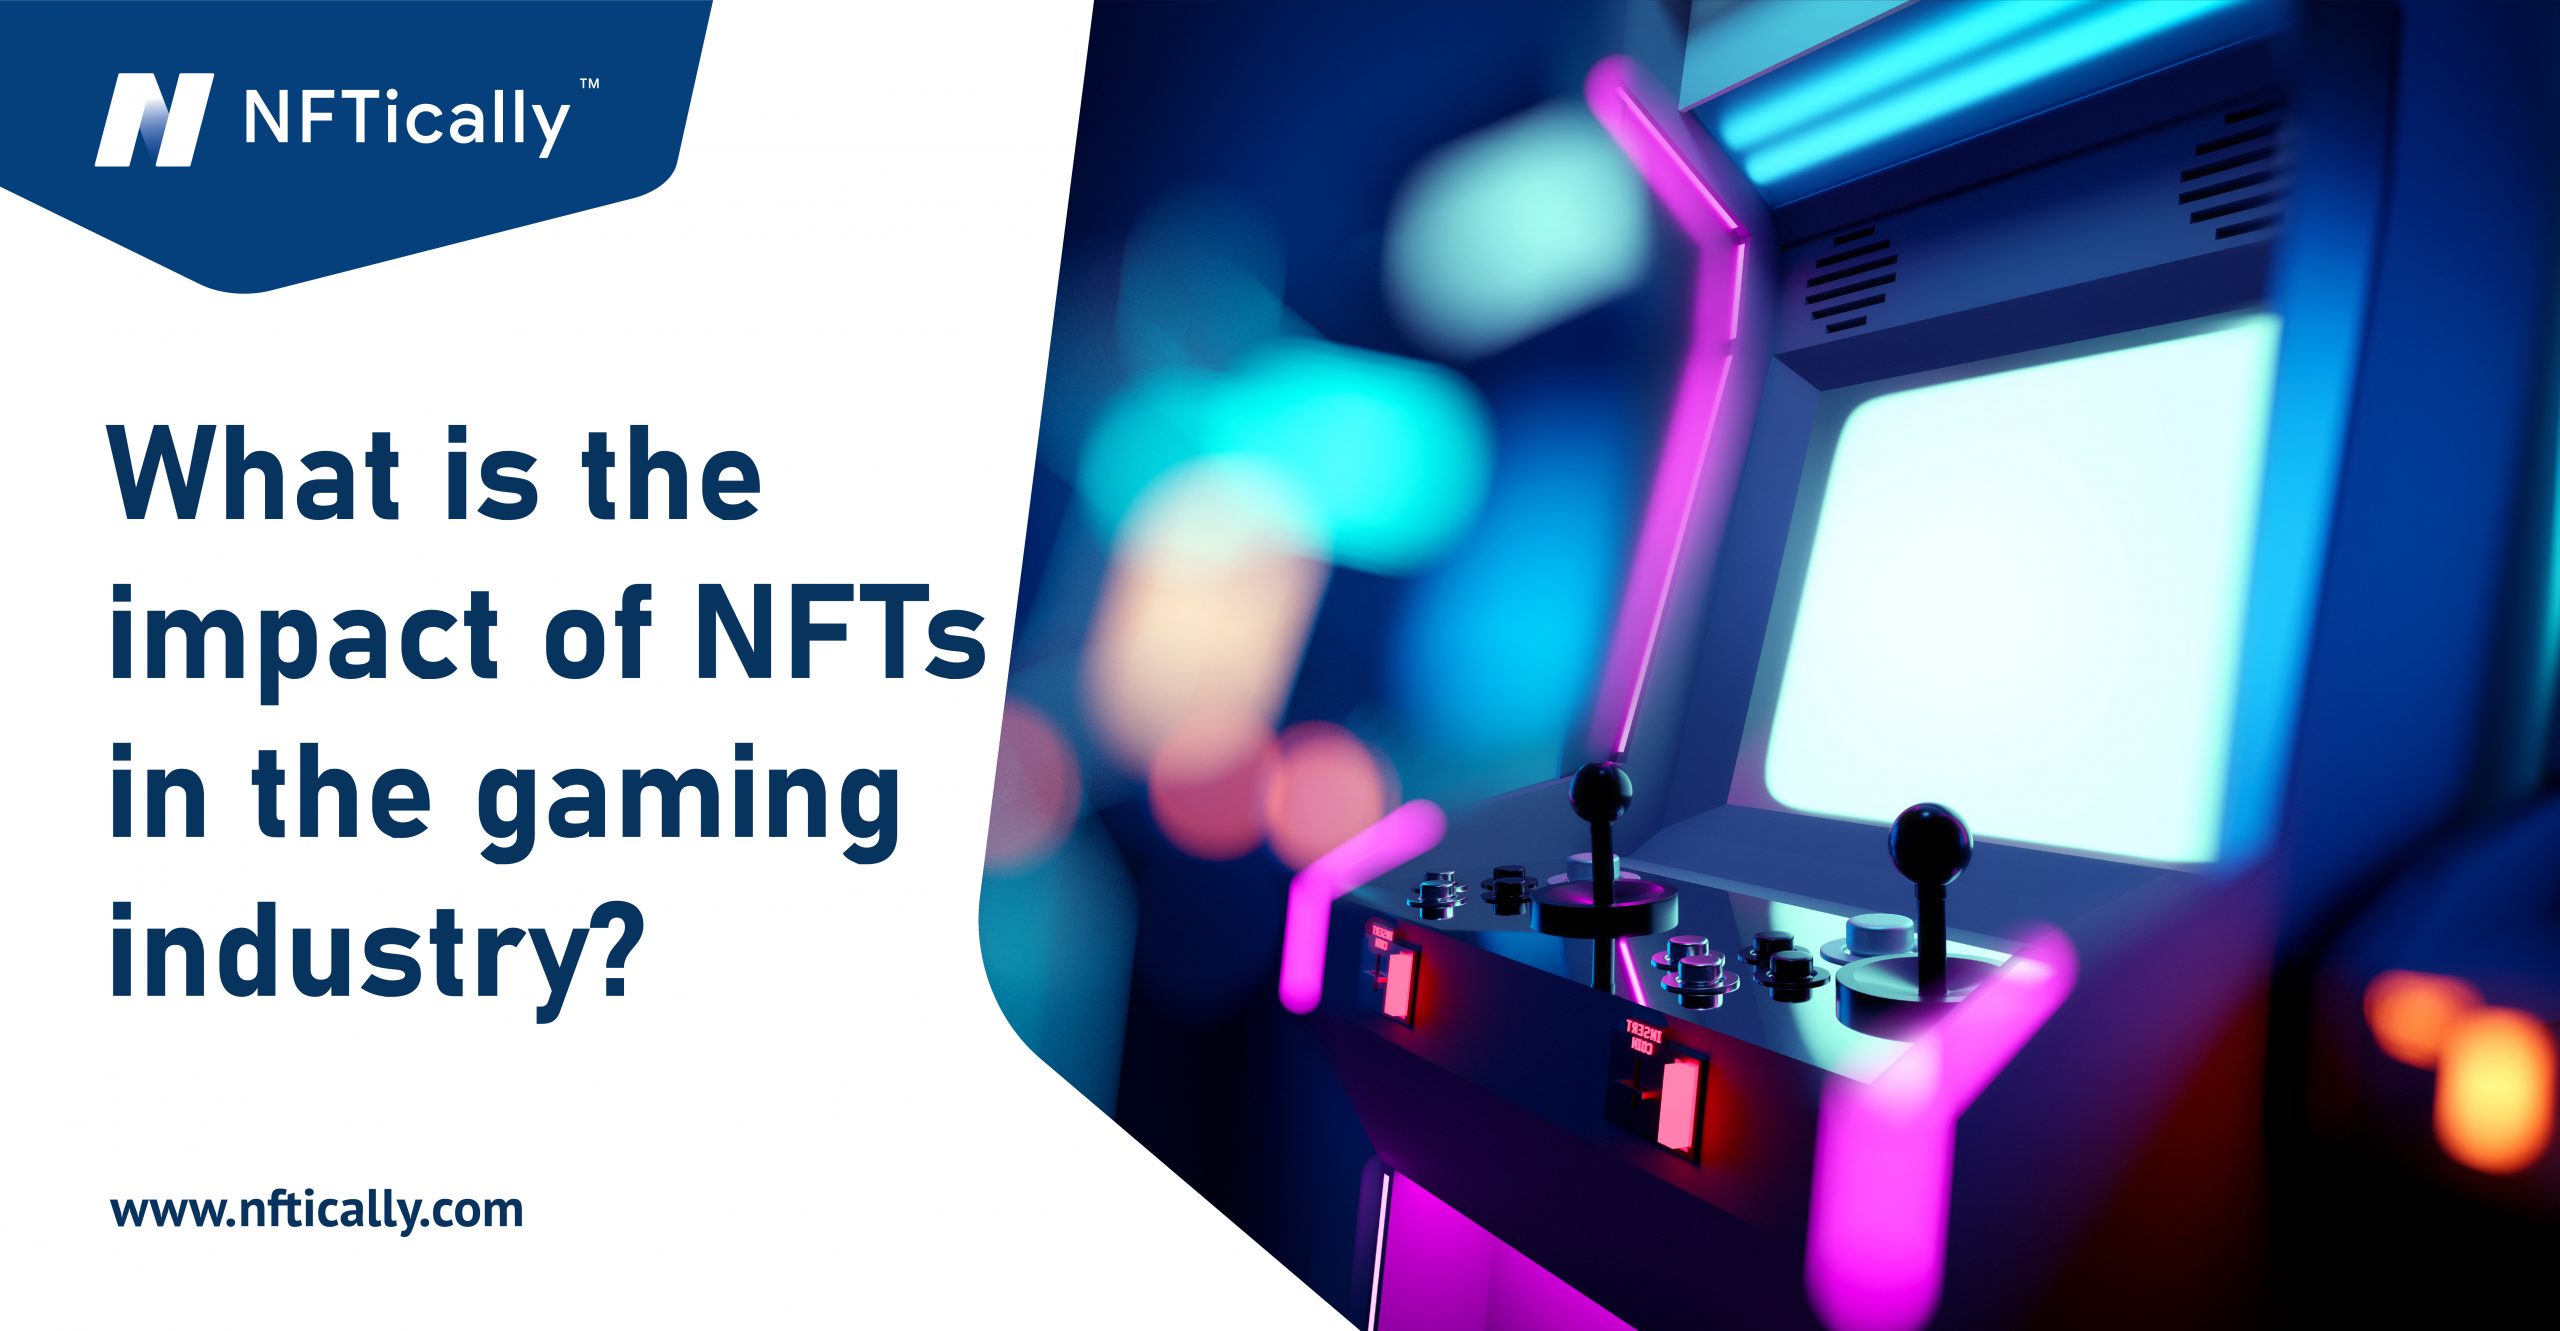 What is the impact of NFTs in the gaming industry?